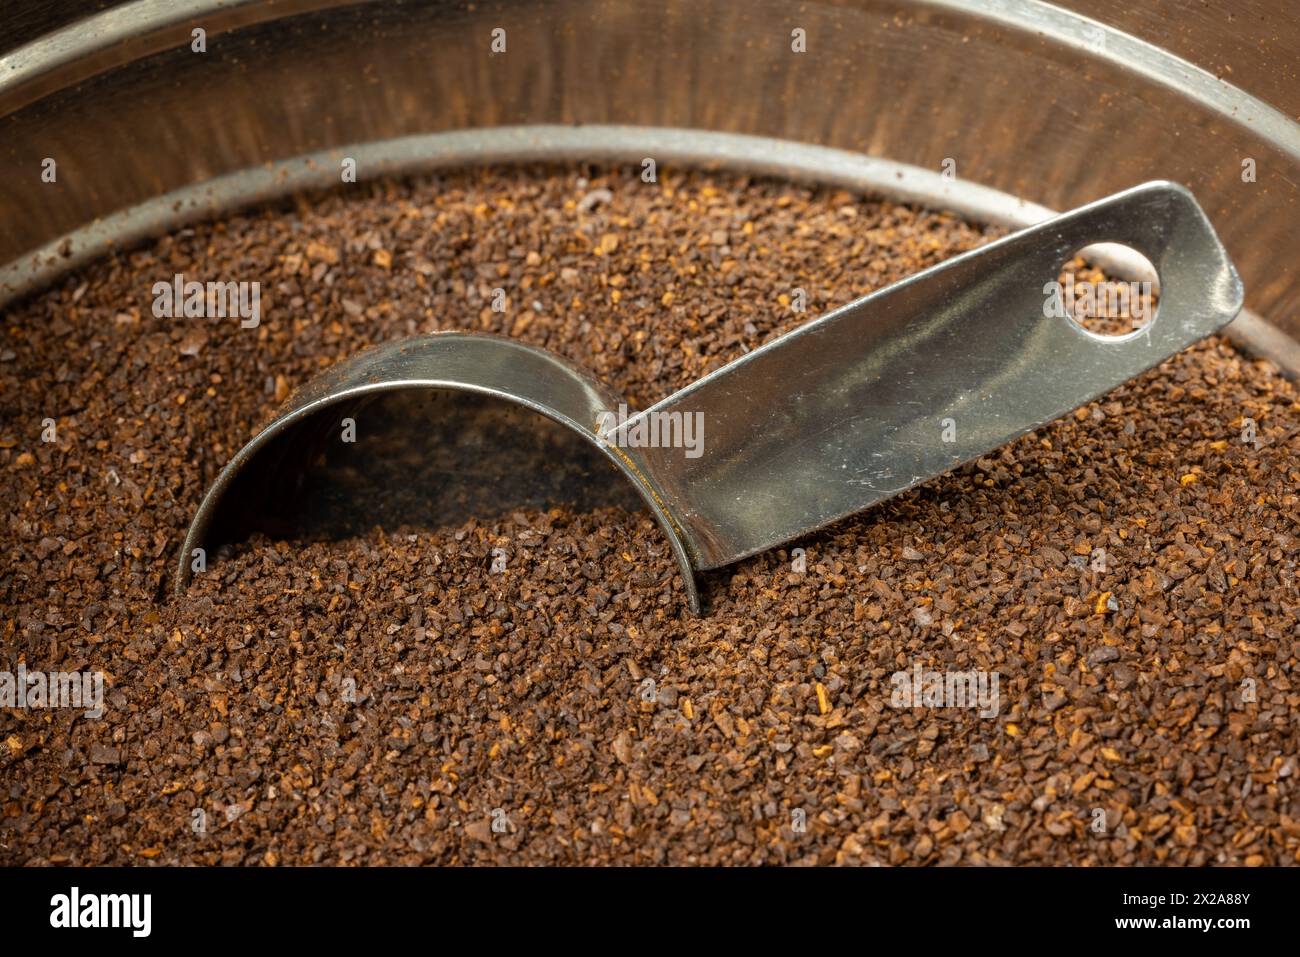 Medium roast coffee grounds with a scoop in a metal coffee can. Stock Photo